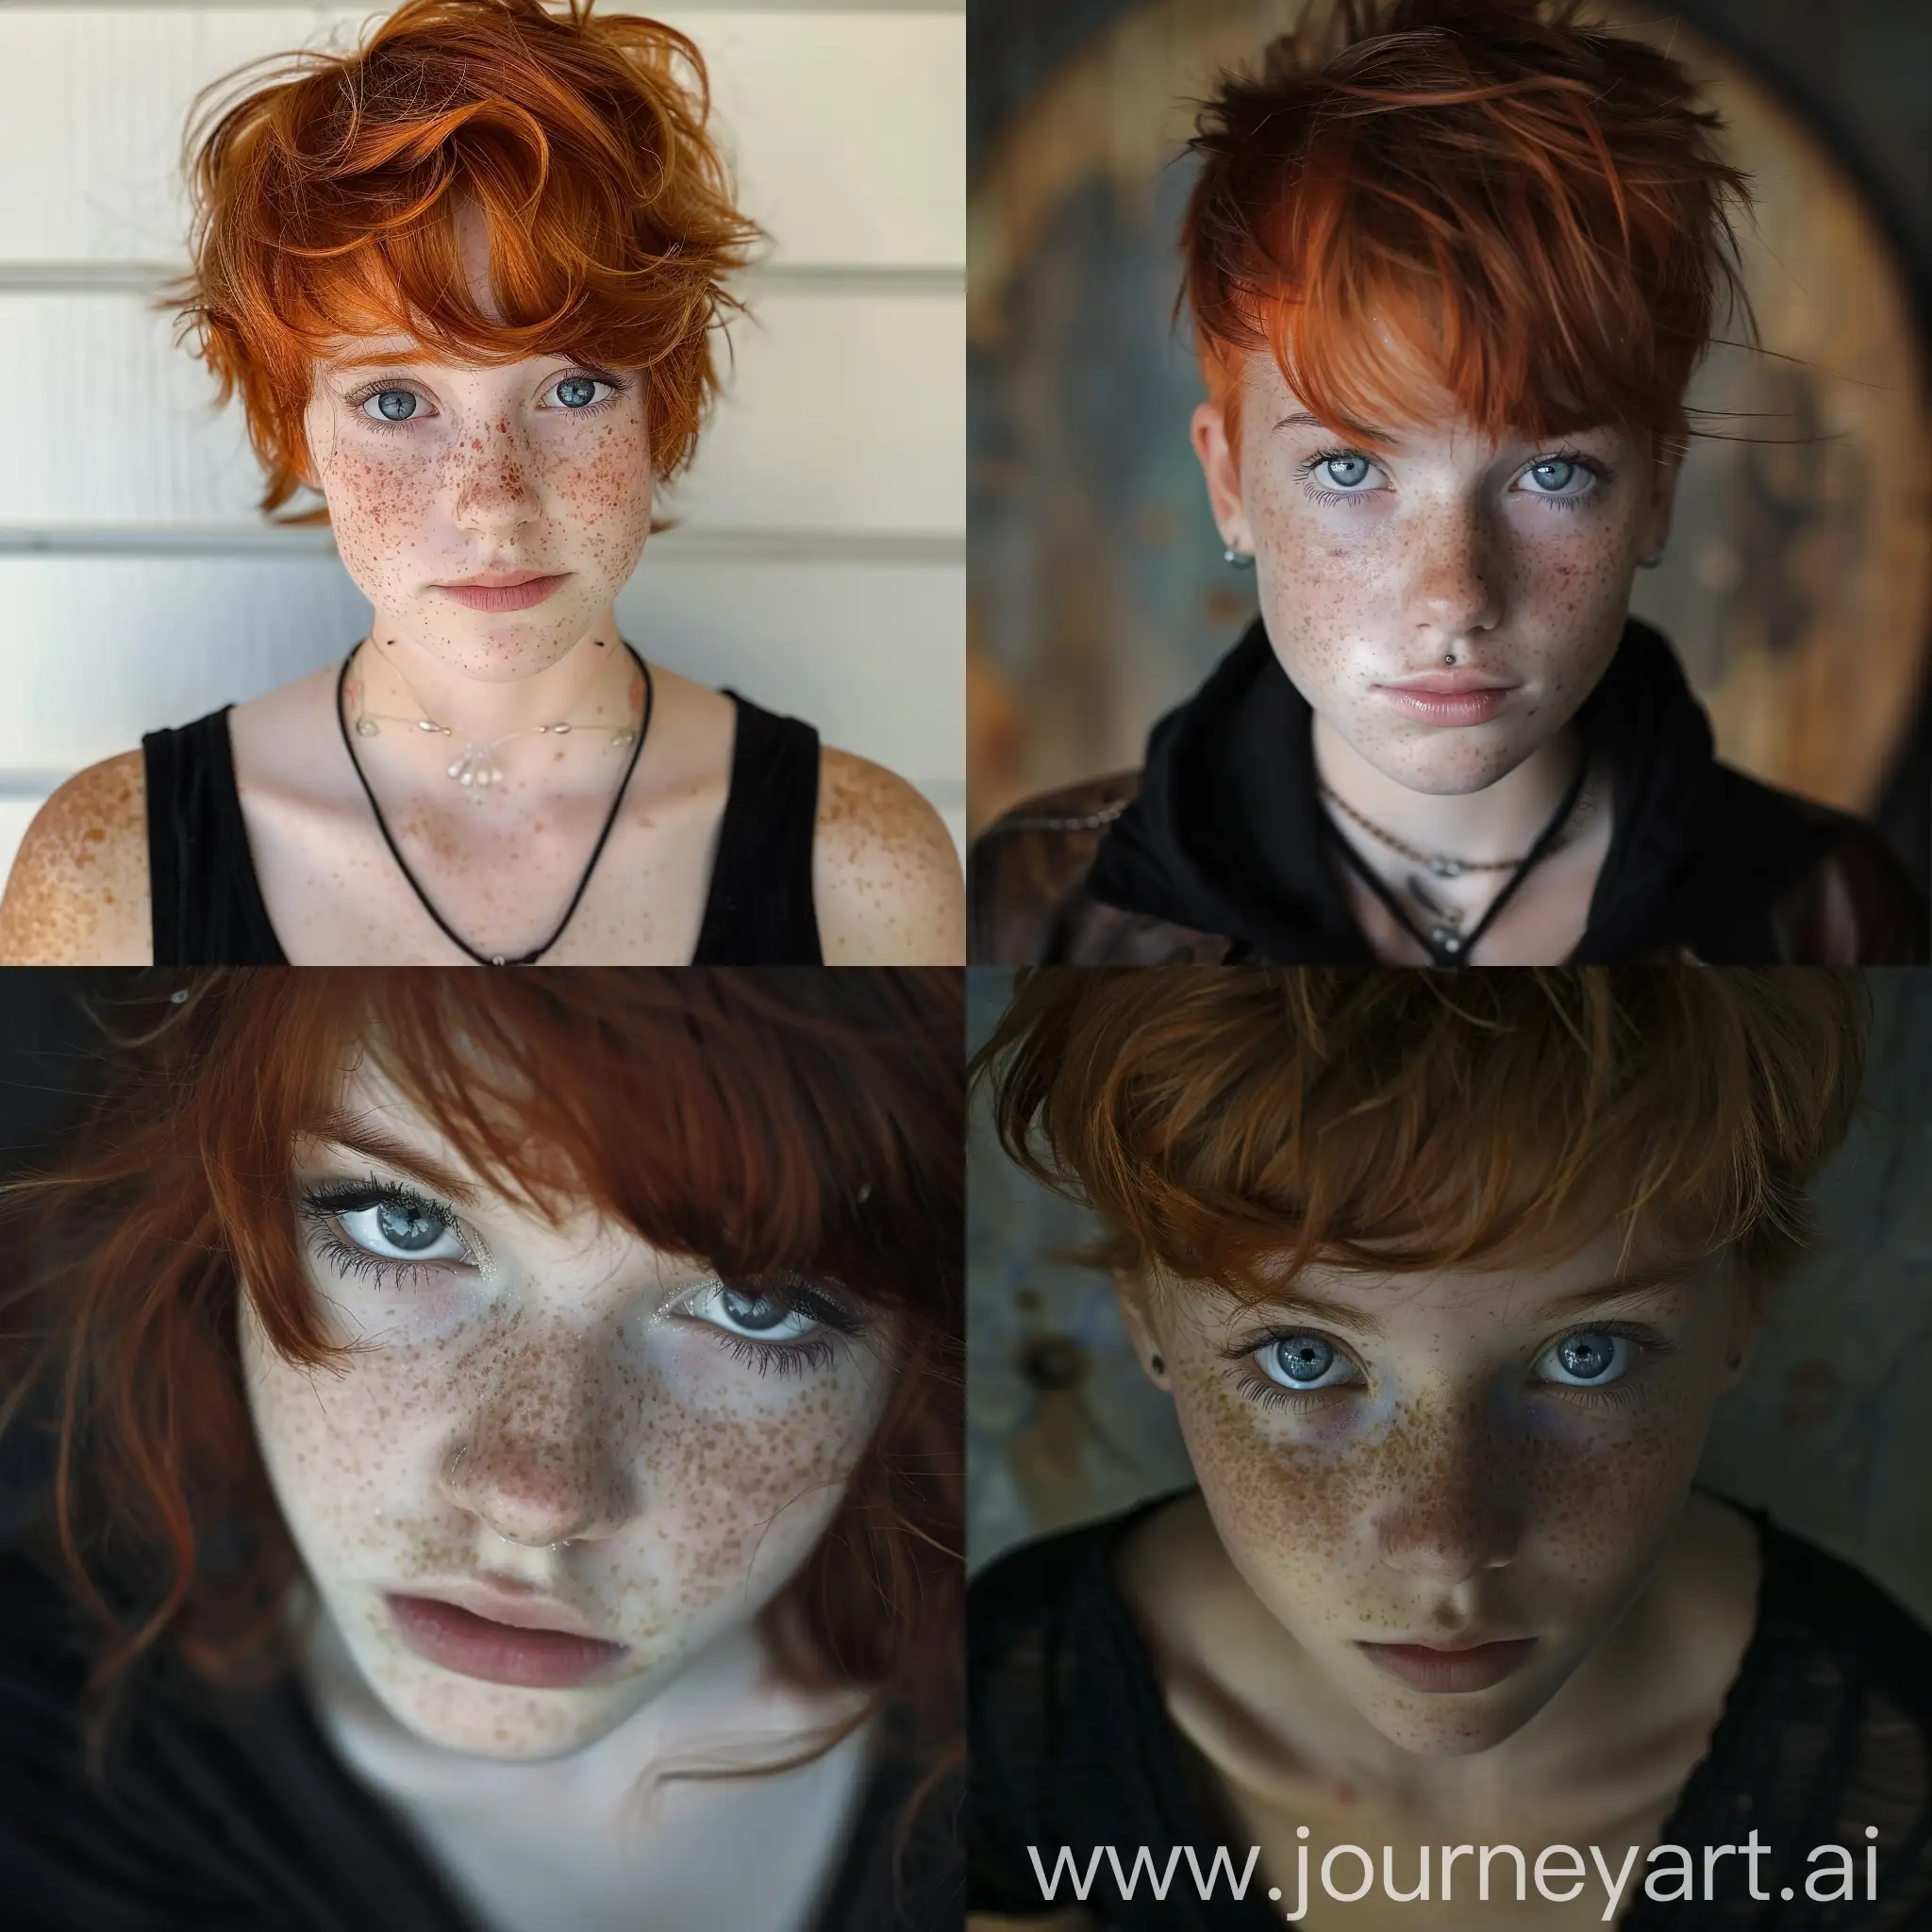 Goth-Pixie-Teen-with-Red-Hair-and-Freckles-in-Icy-Blue-Gaze